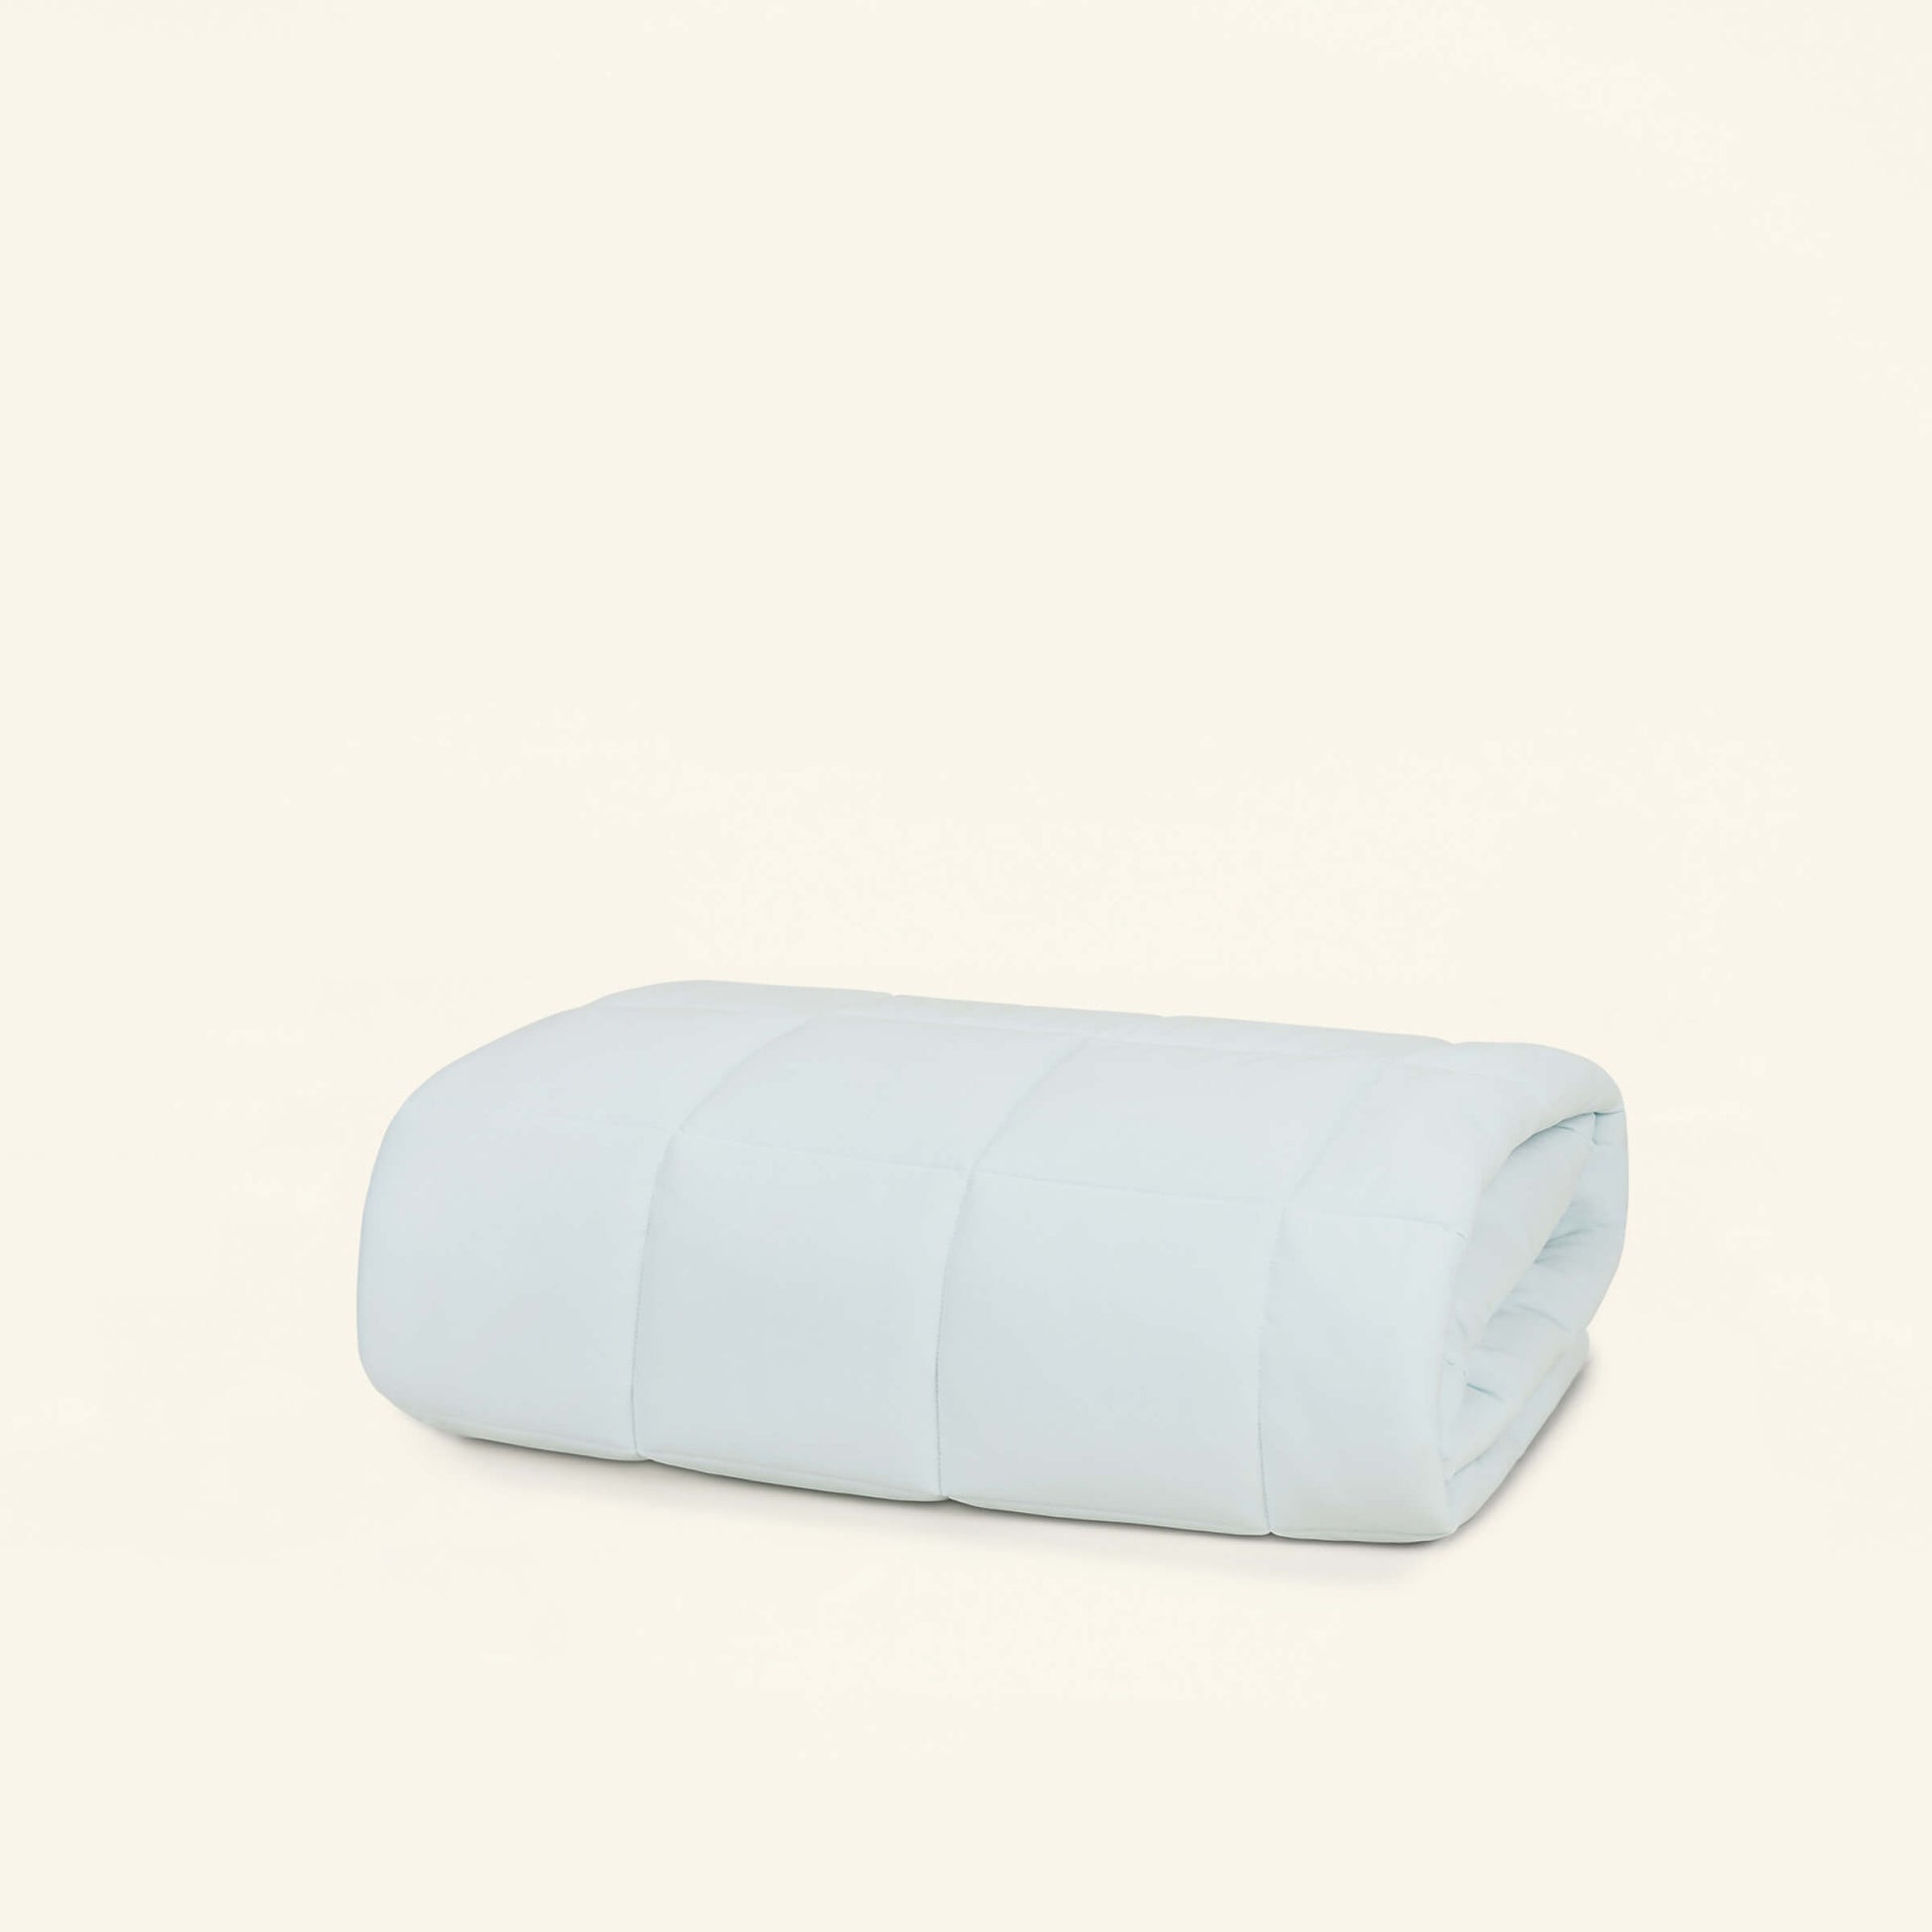 The Slumber Cloud Essential Mattress Pad made with Outlast temperature regulation technology, folded on a cream background